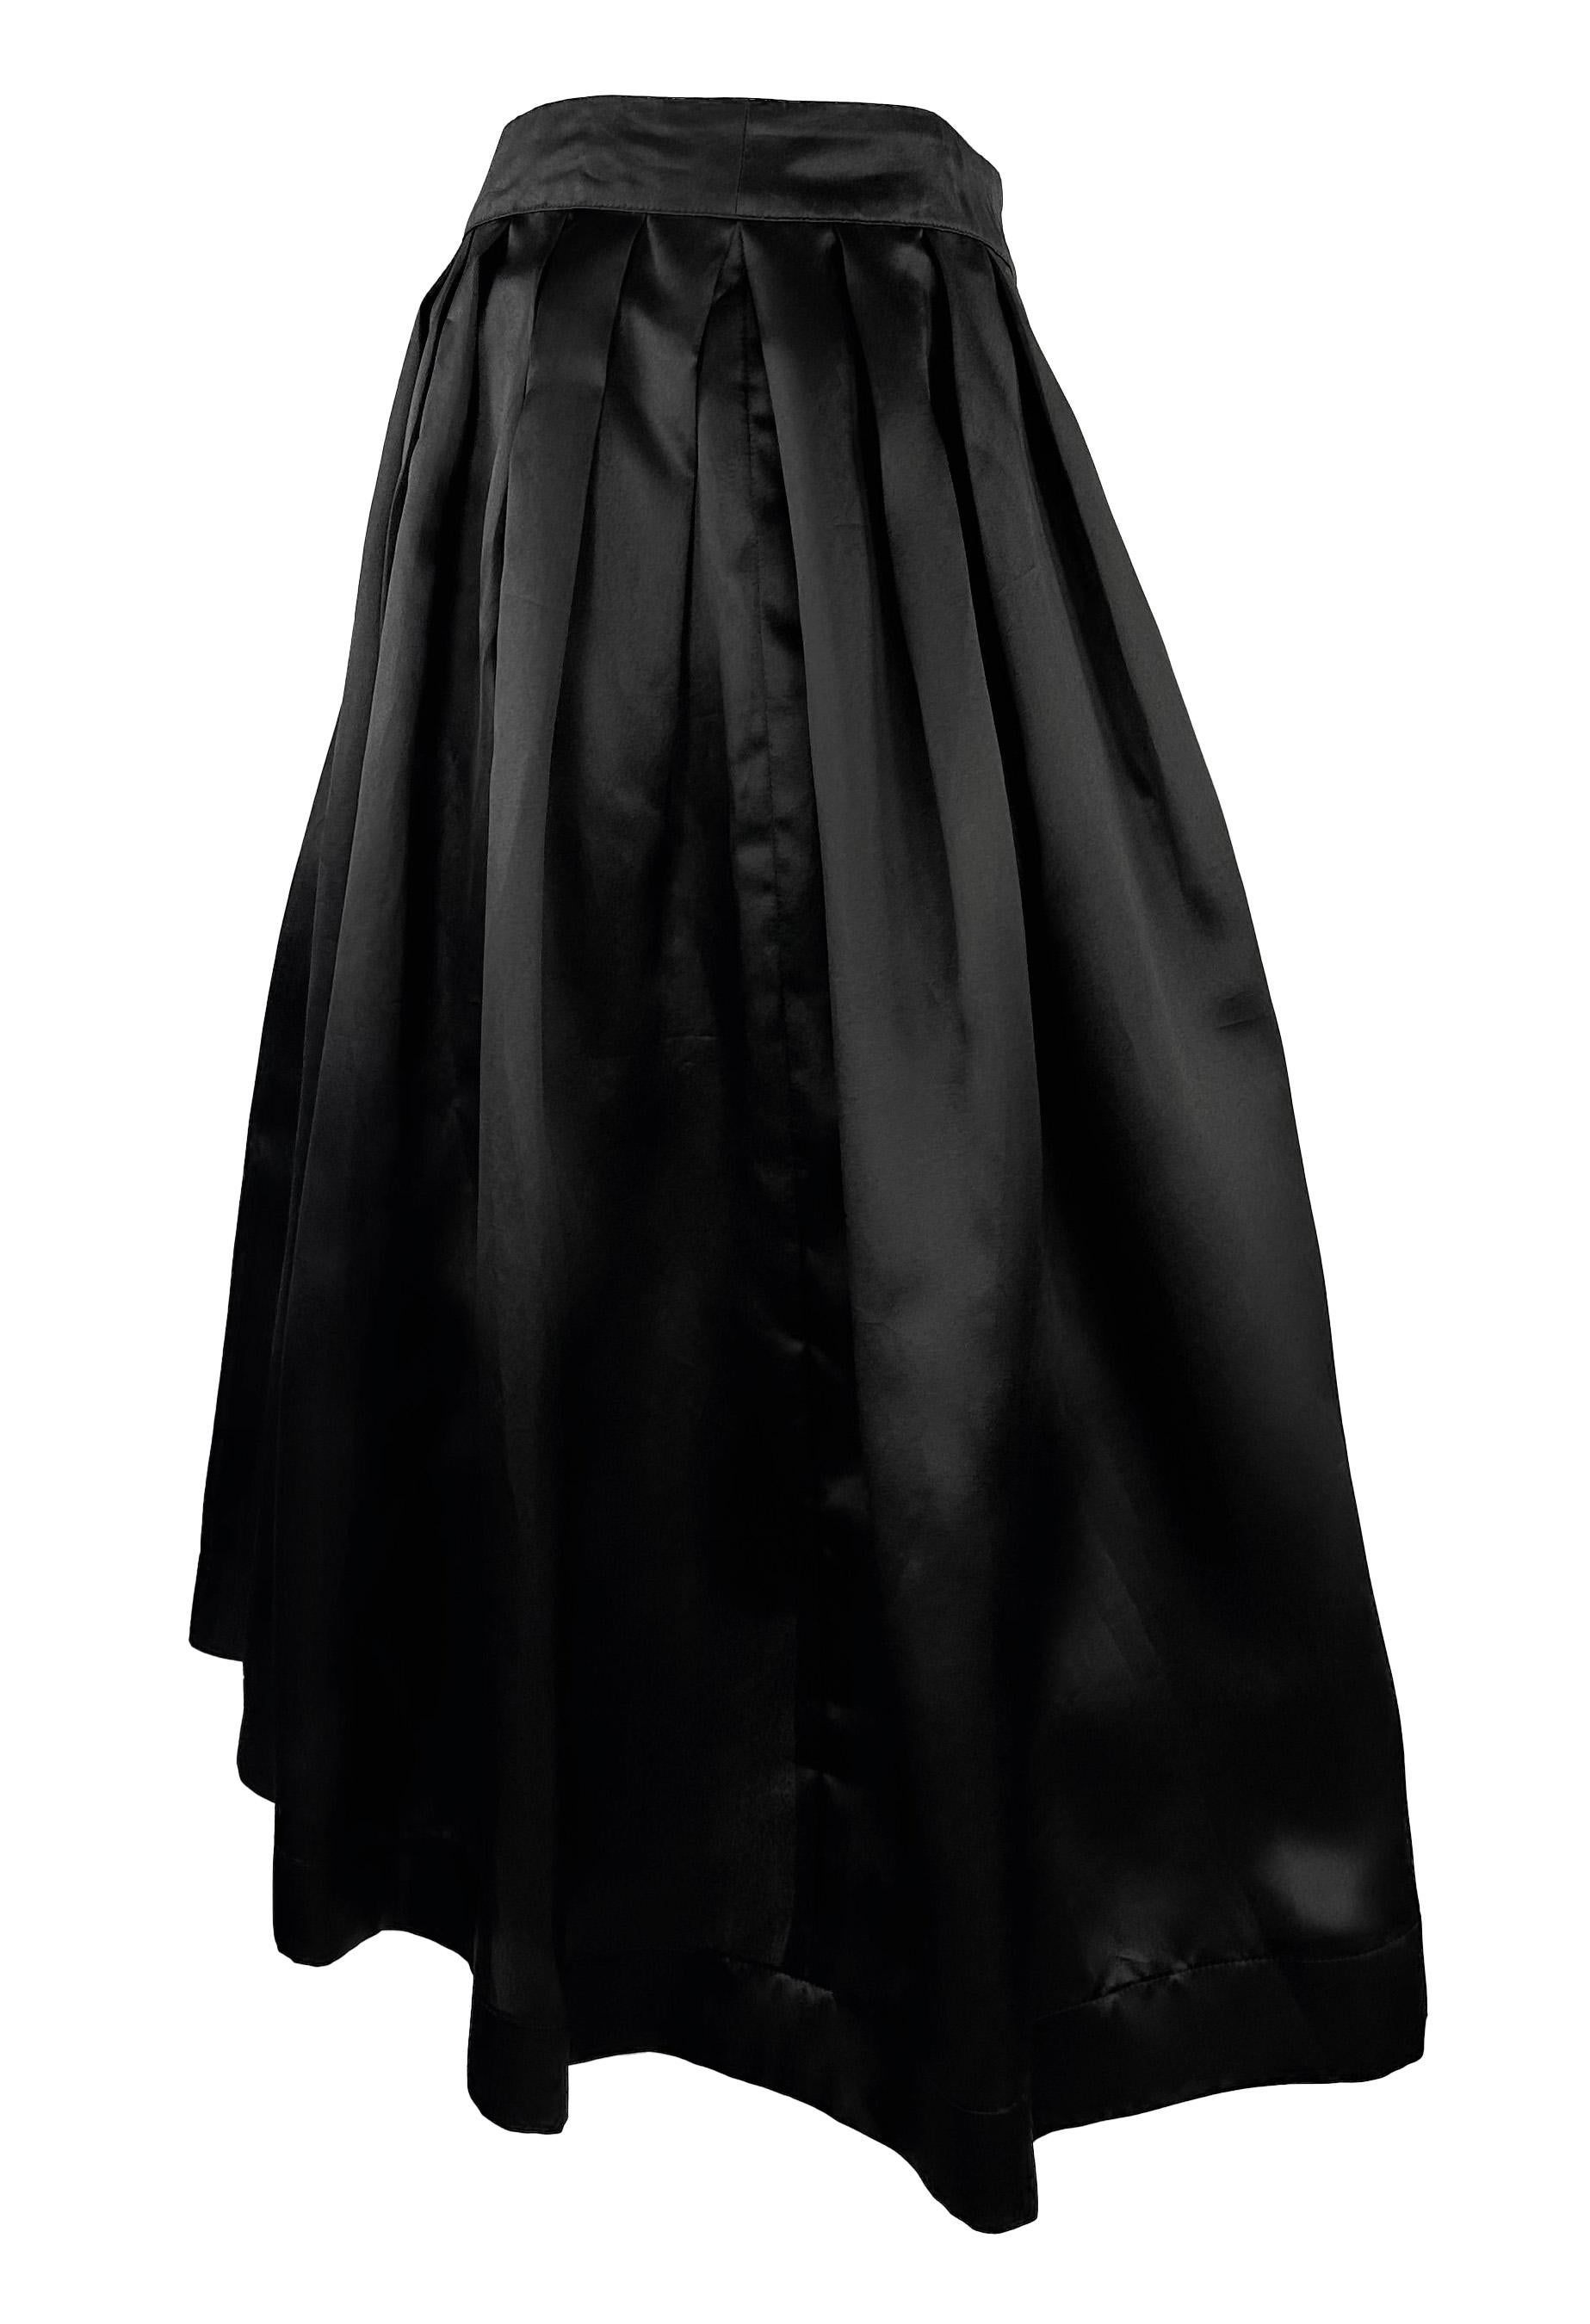 S/S 1995 Gucci by Tom Ford Runway Black Silk Satin Pleated Flare Skirt For Sale 2